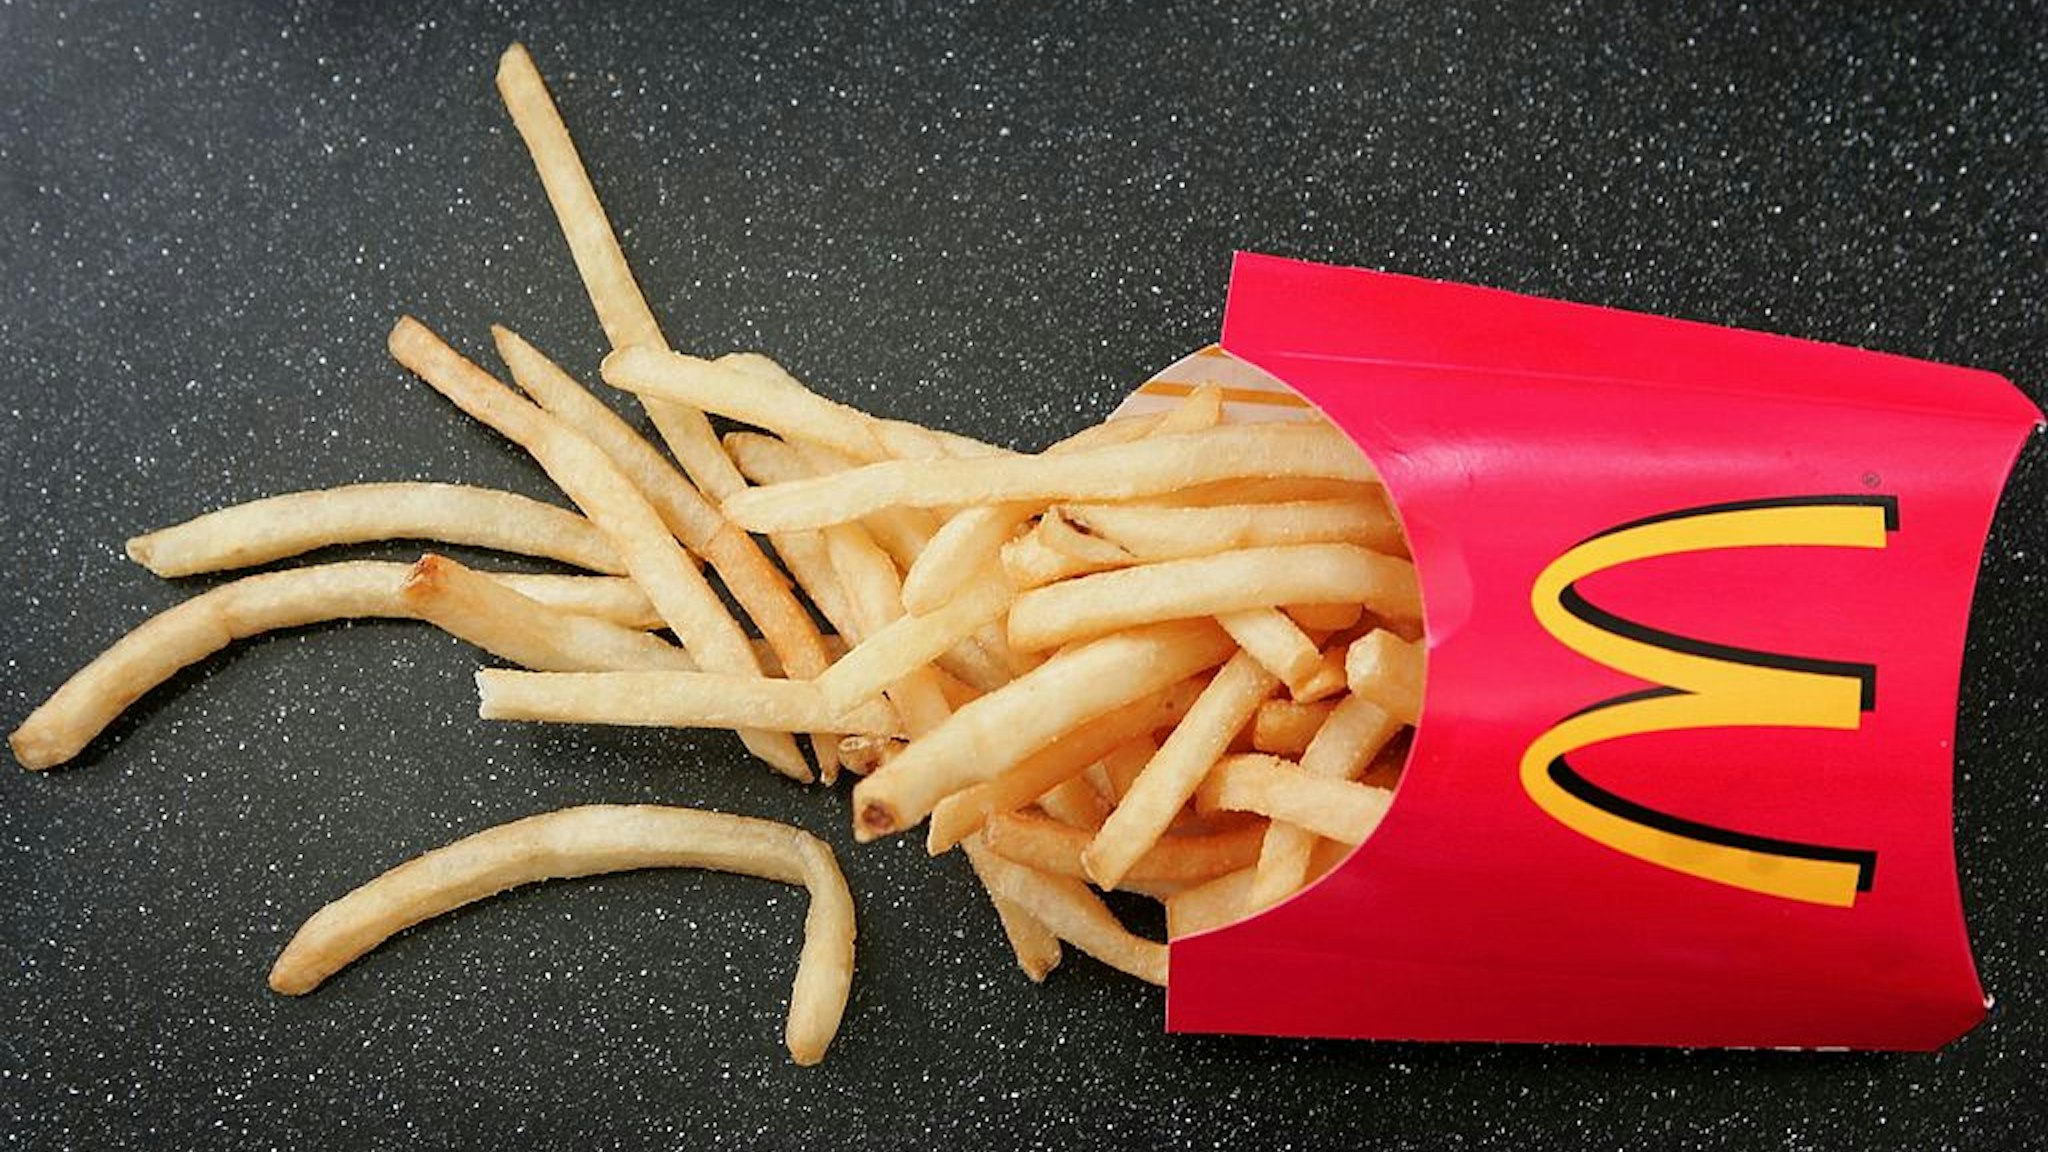 DES PLAINES, IL - FEBRUARY 15: French fries sit on a table at a McDonald's restaurant February 15, 2006 in Des Plaines, Illinois. McDonald's announced February 13 that their french fries contain potential allergens from both wheat and dairy ingredients used to add flavor. (Photo Illustration by Scott Olson/Getty Images)